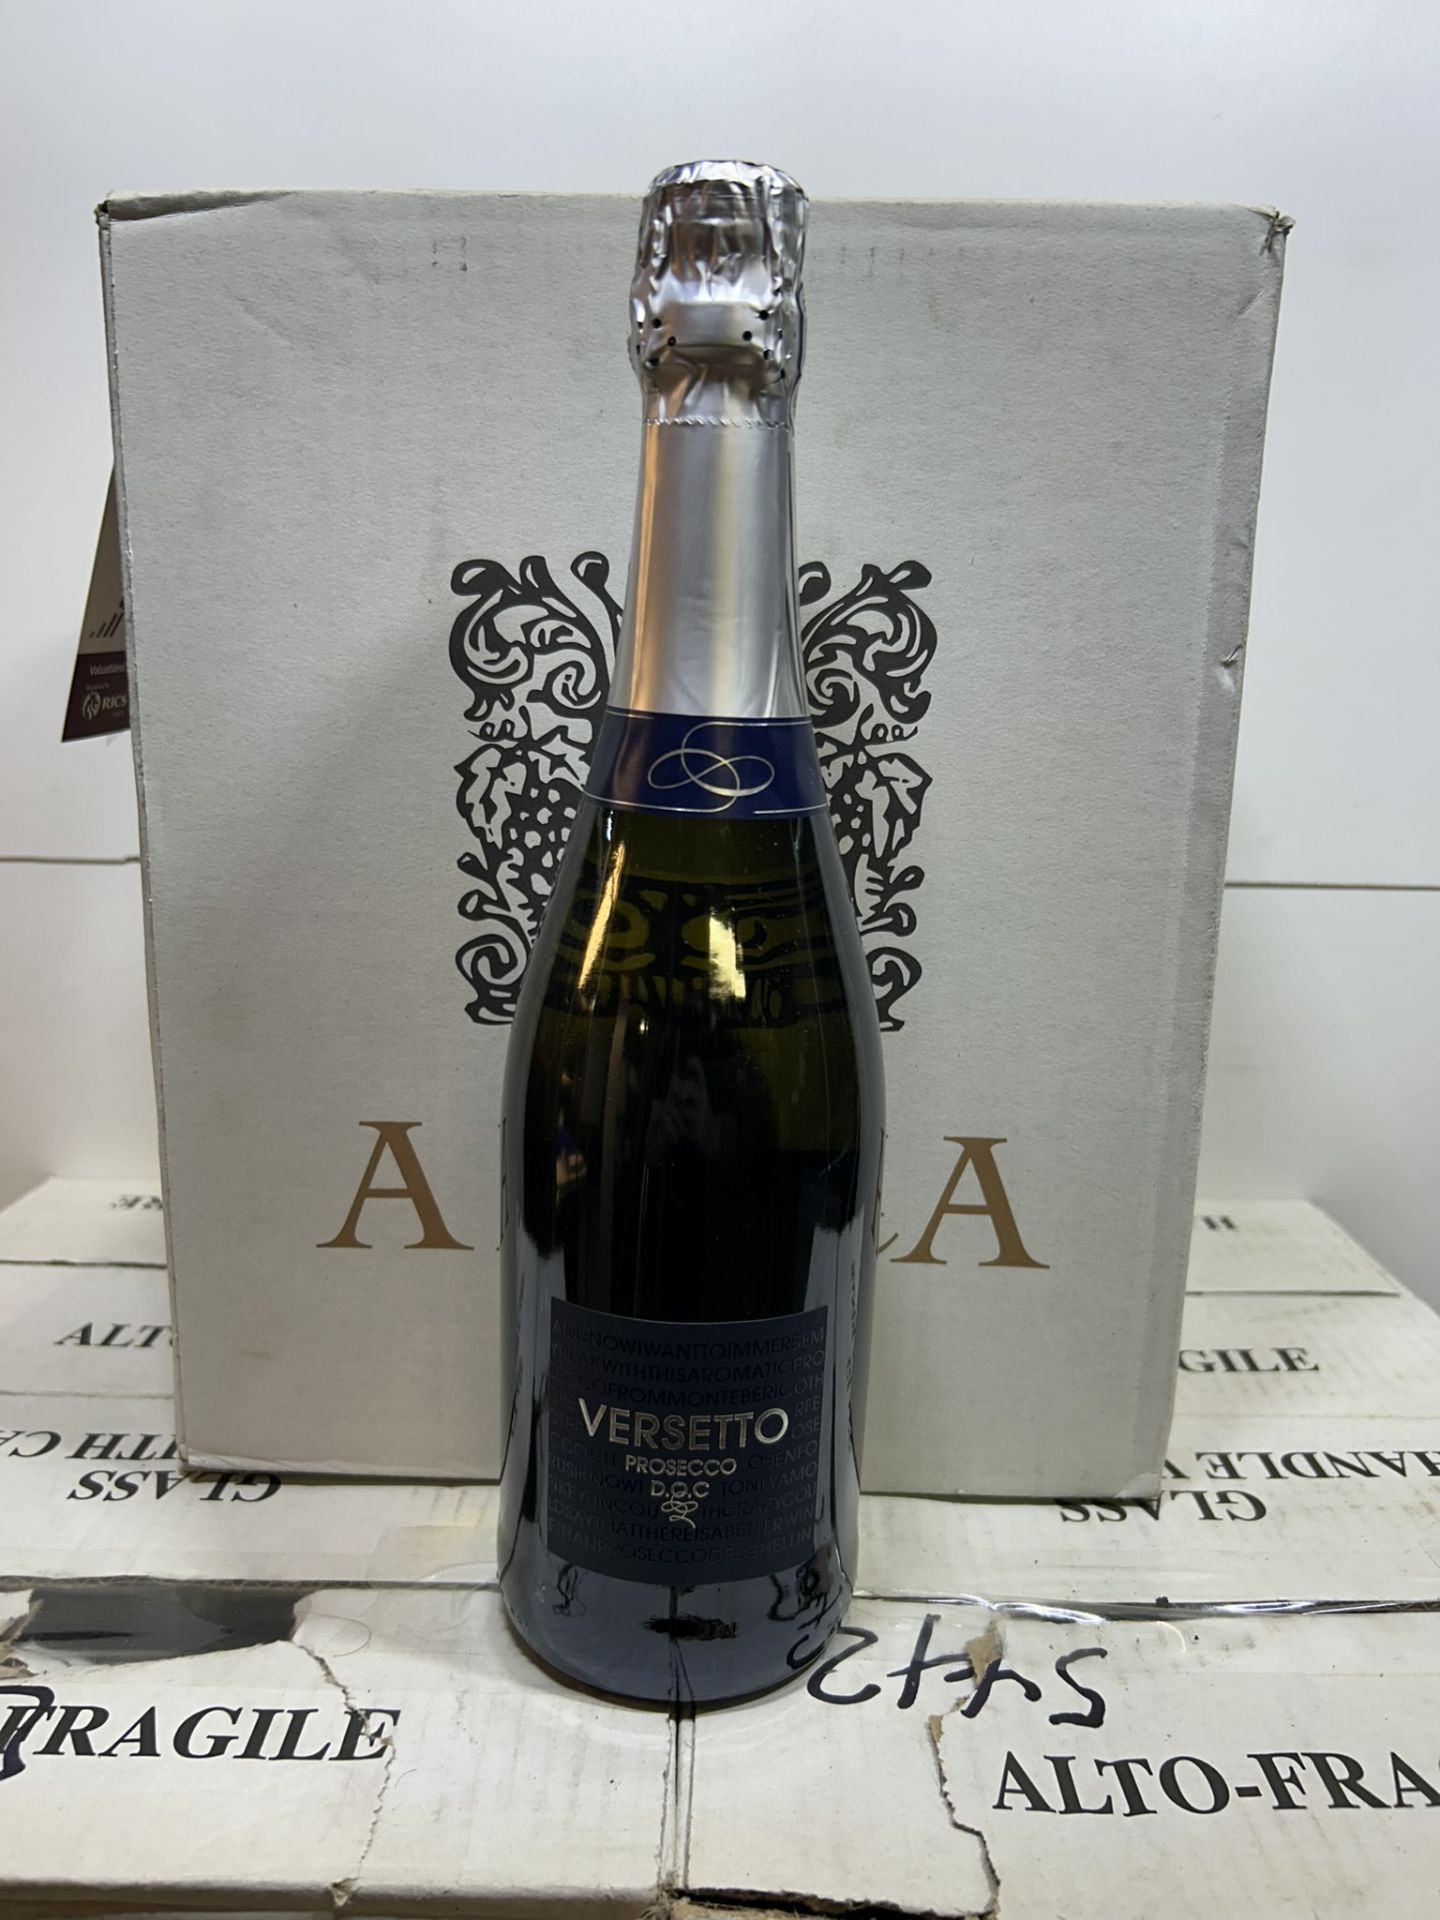 6 x Crates of Adria Versetto/Fontessa Spumante Prosecco & 12 x Loose Bottles (48 x Bottles in Total) - Image 2 of 7